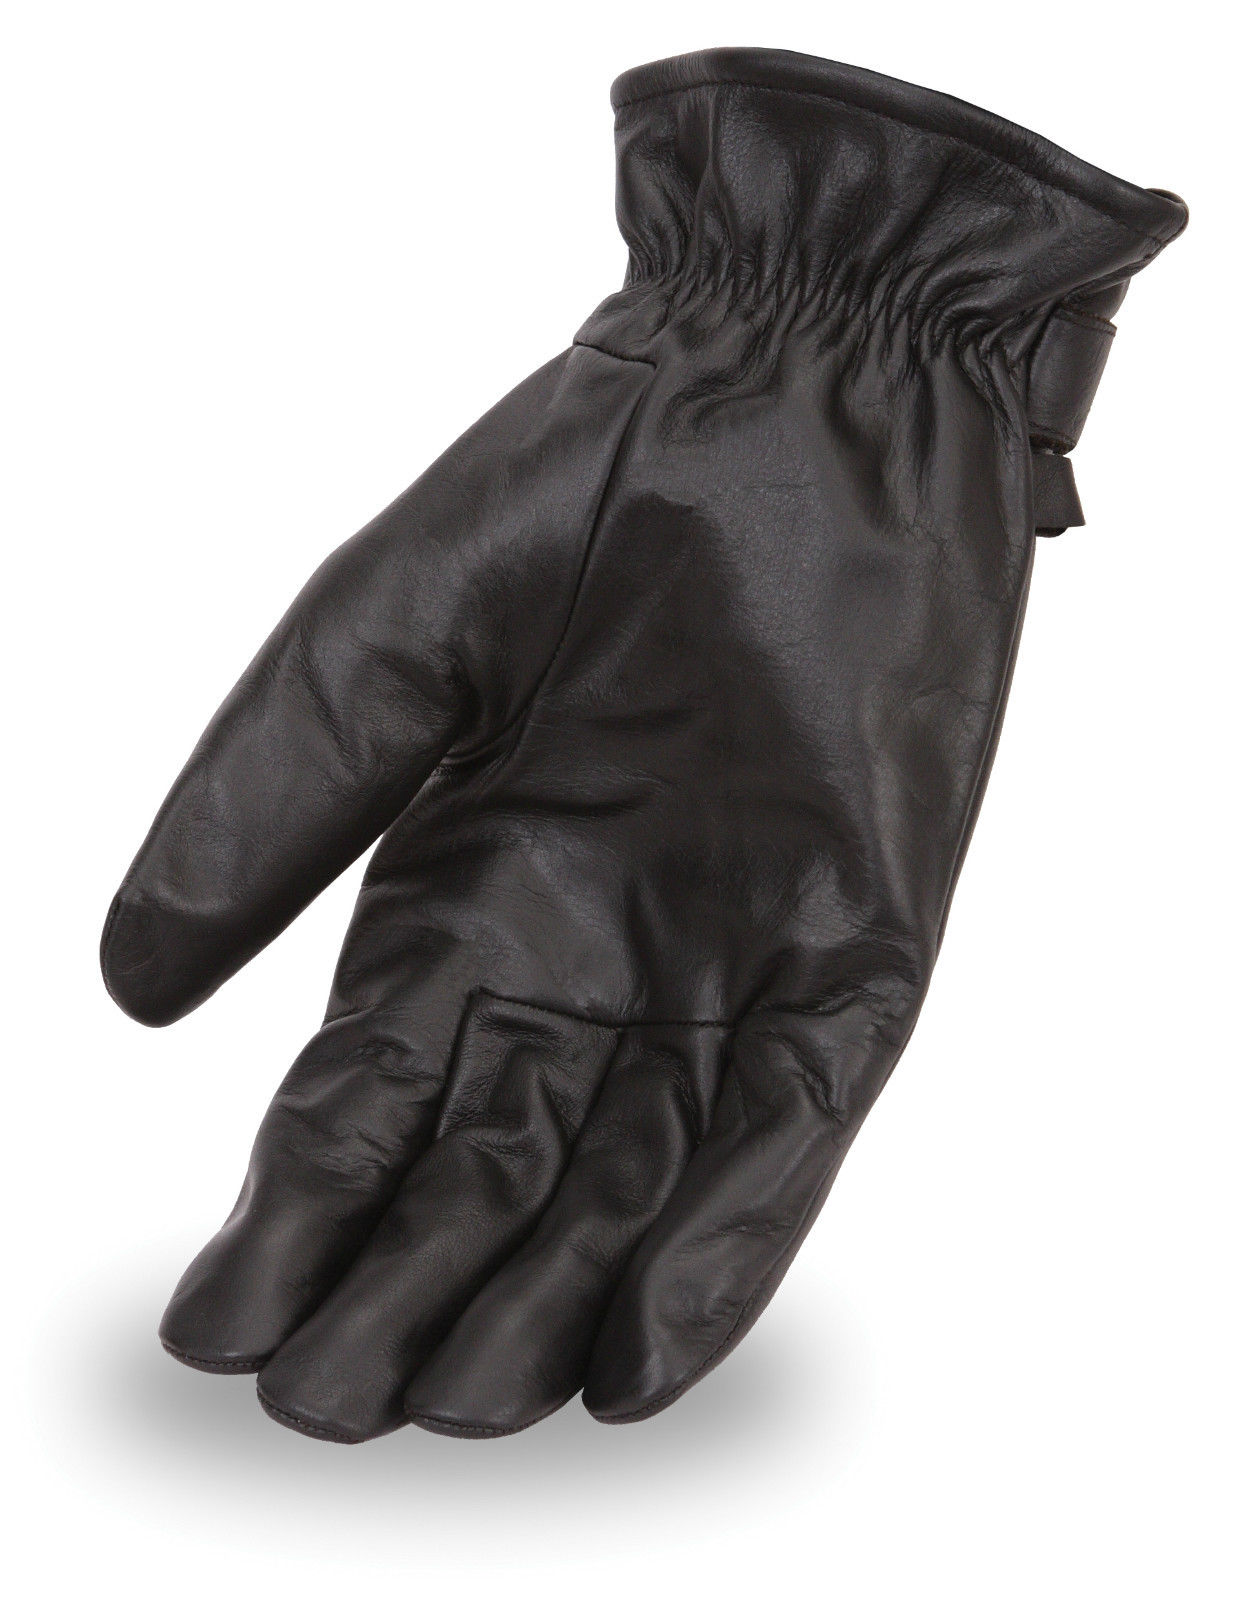 Men's Military Style Leather Motorcycle Riding Gloves w/ Thermal Liner FI115GL - image 2 of 3